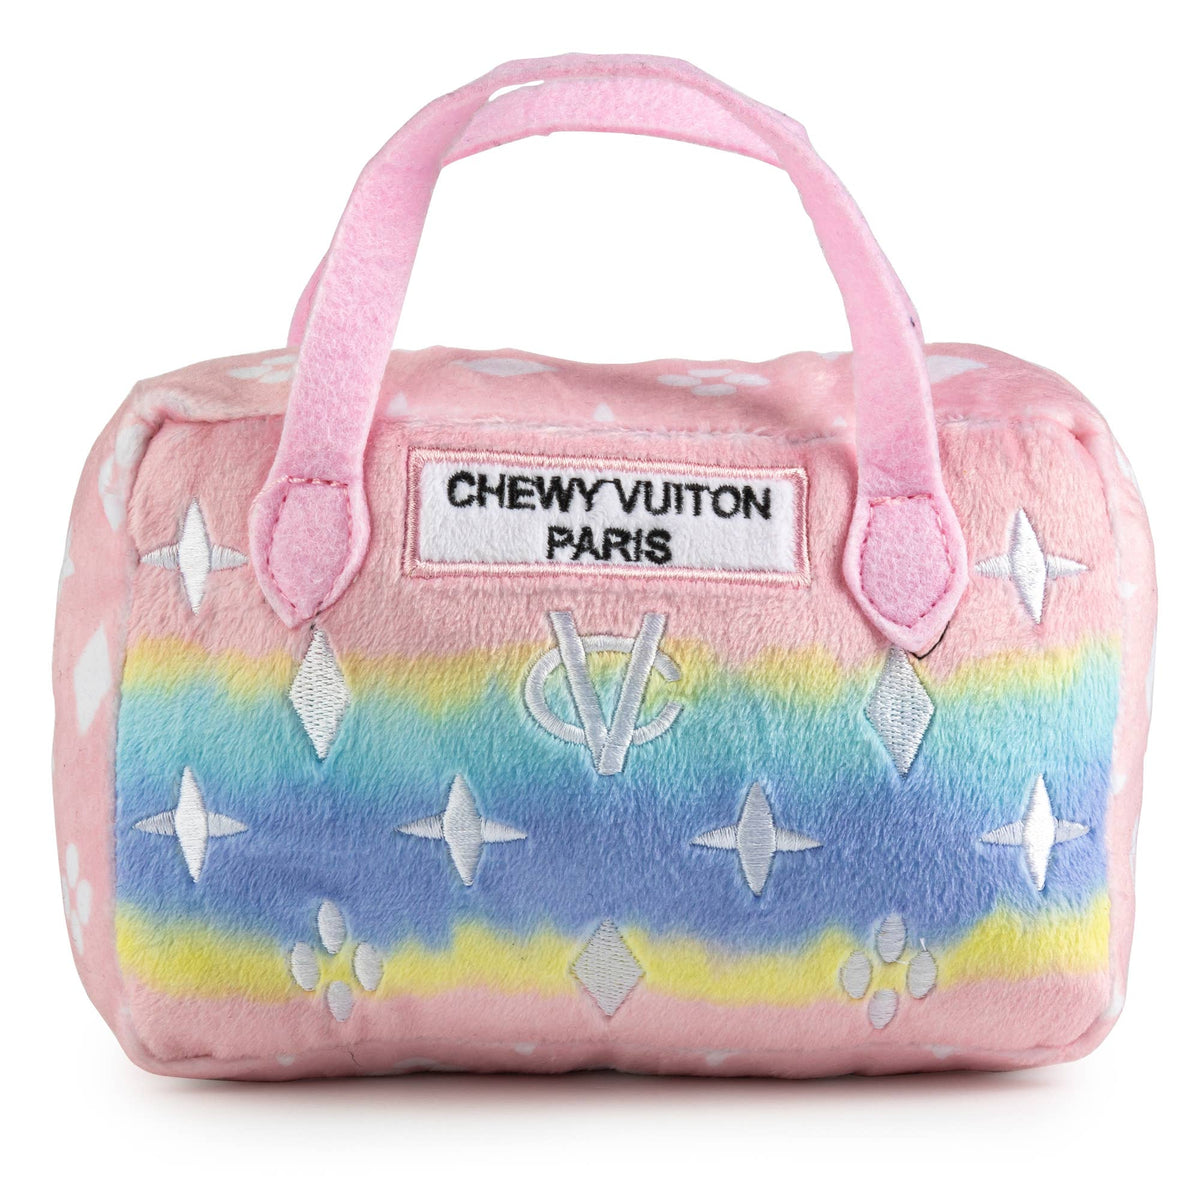 Pink Ombre Chewy Vuiton Handbag Squeaker Dog Toy